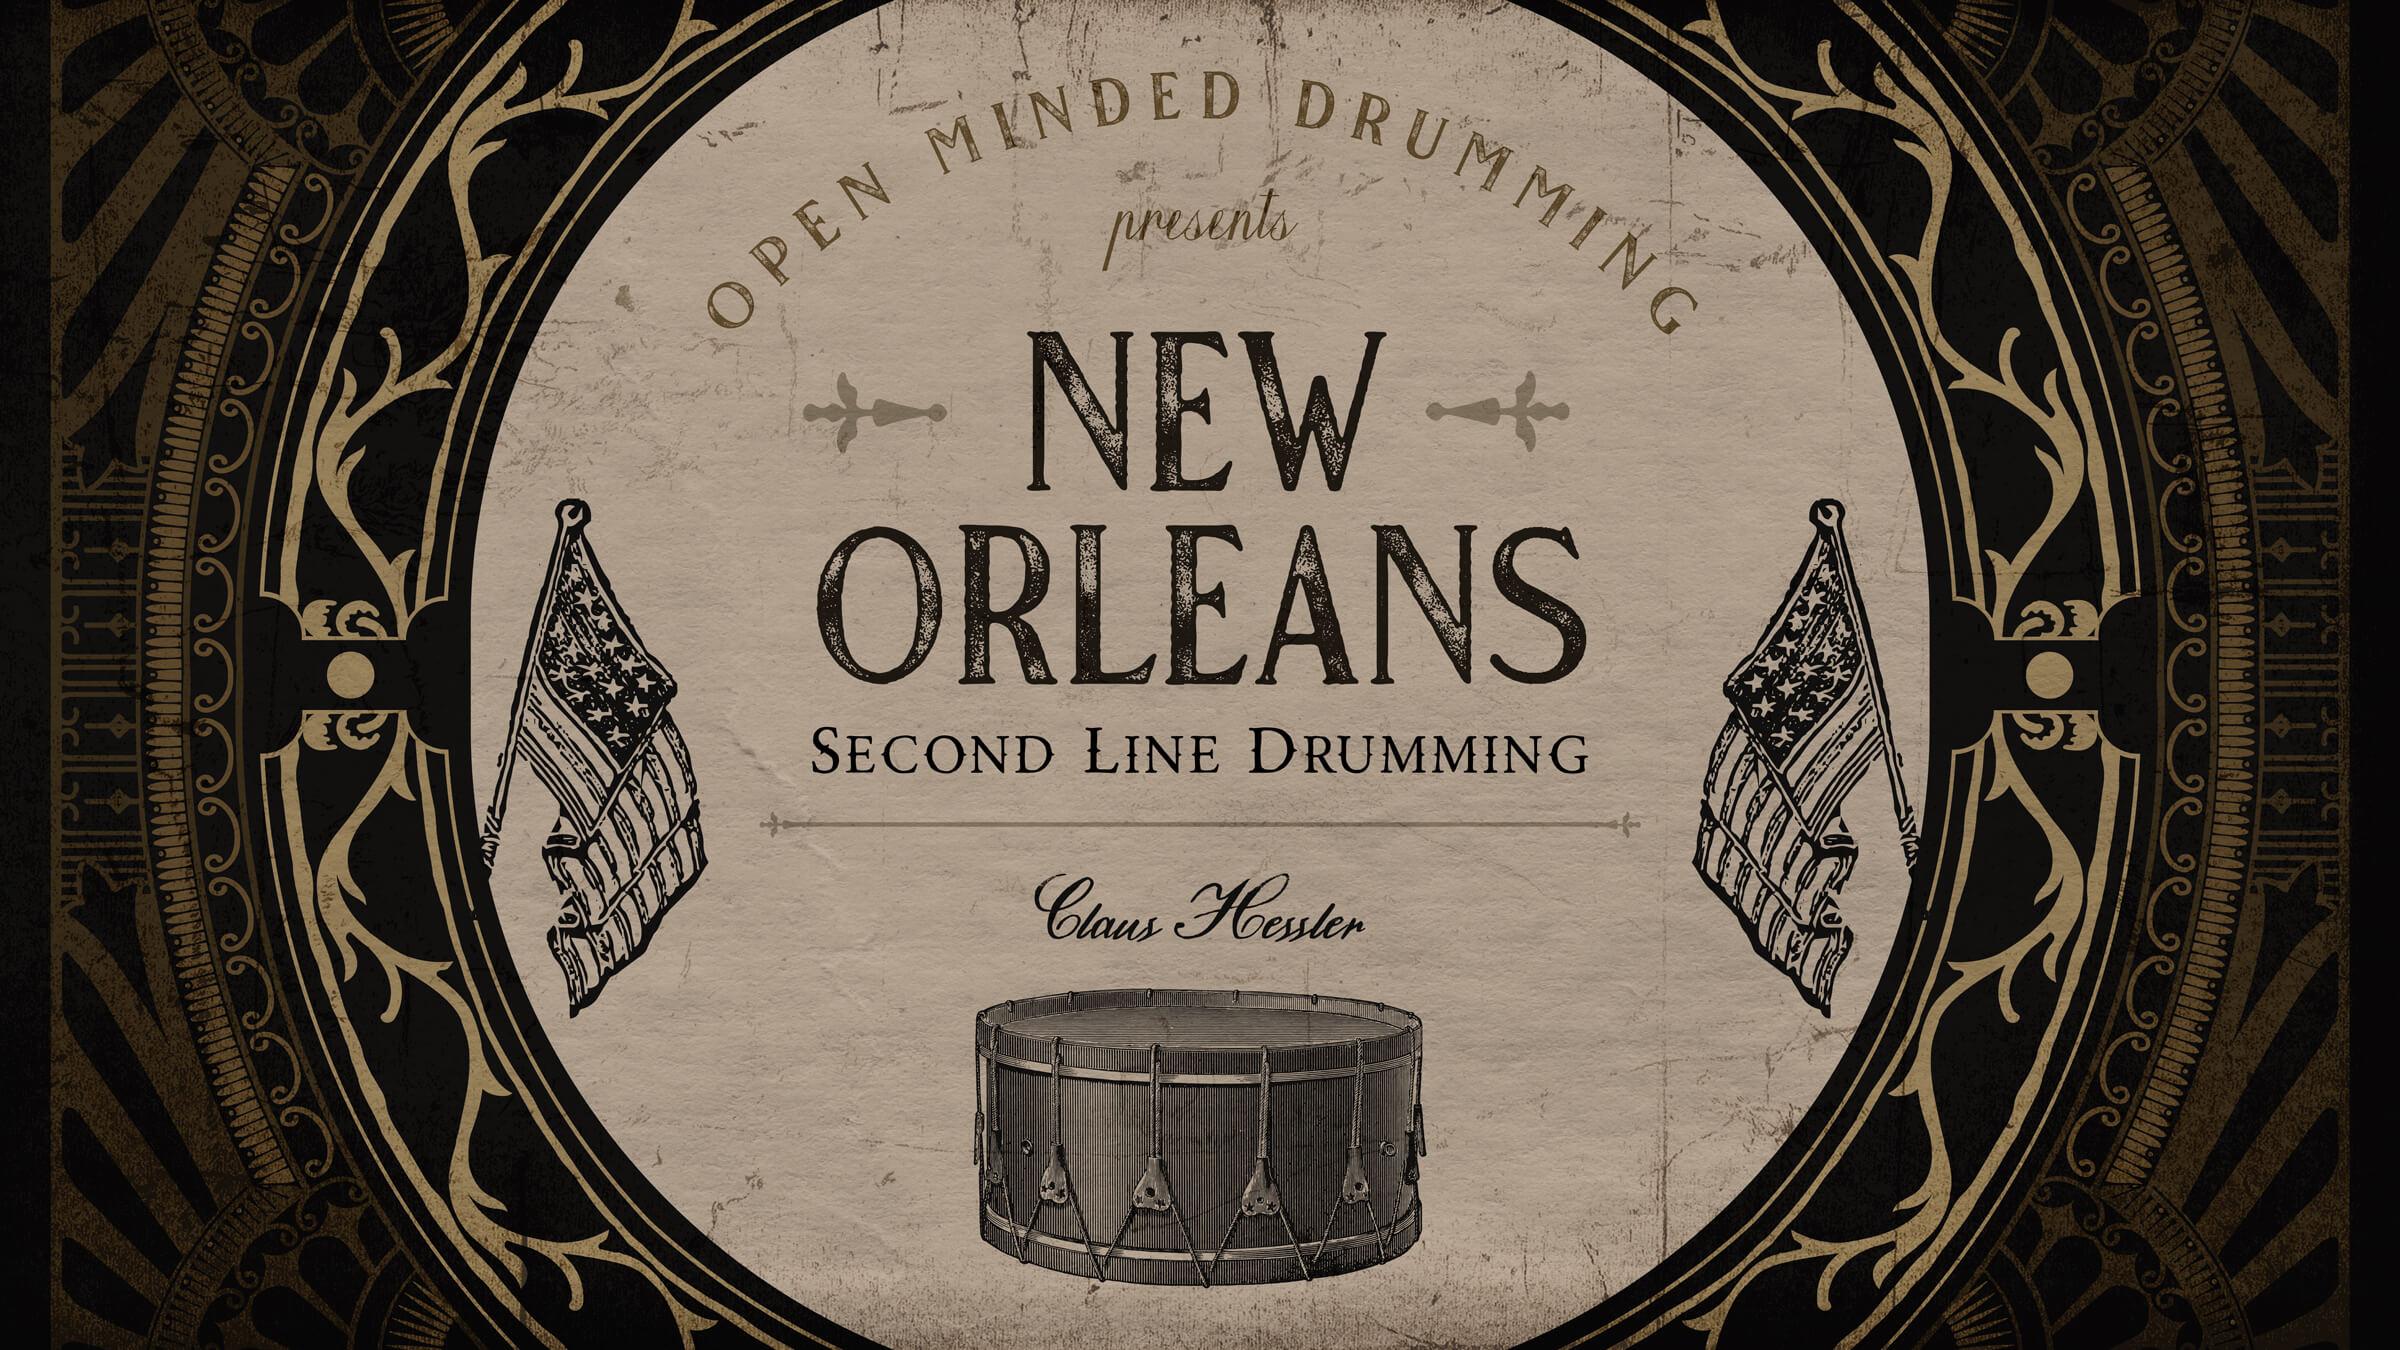 Discover legendary New Orleans Second Line Drumming with Claus Hessler